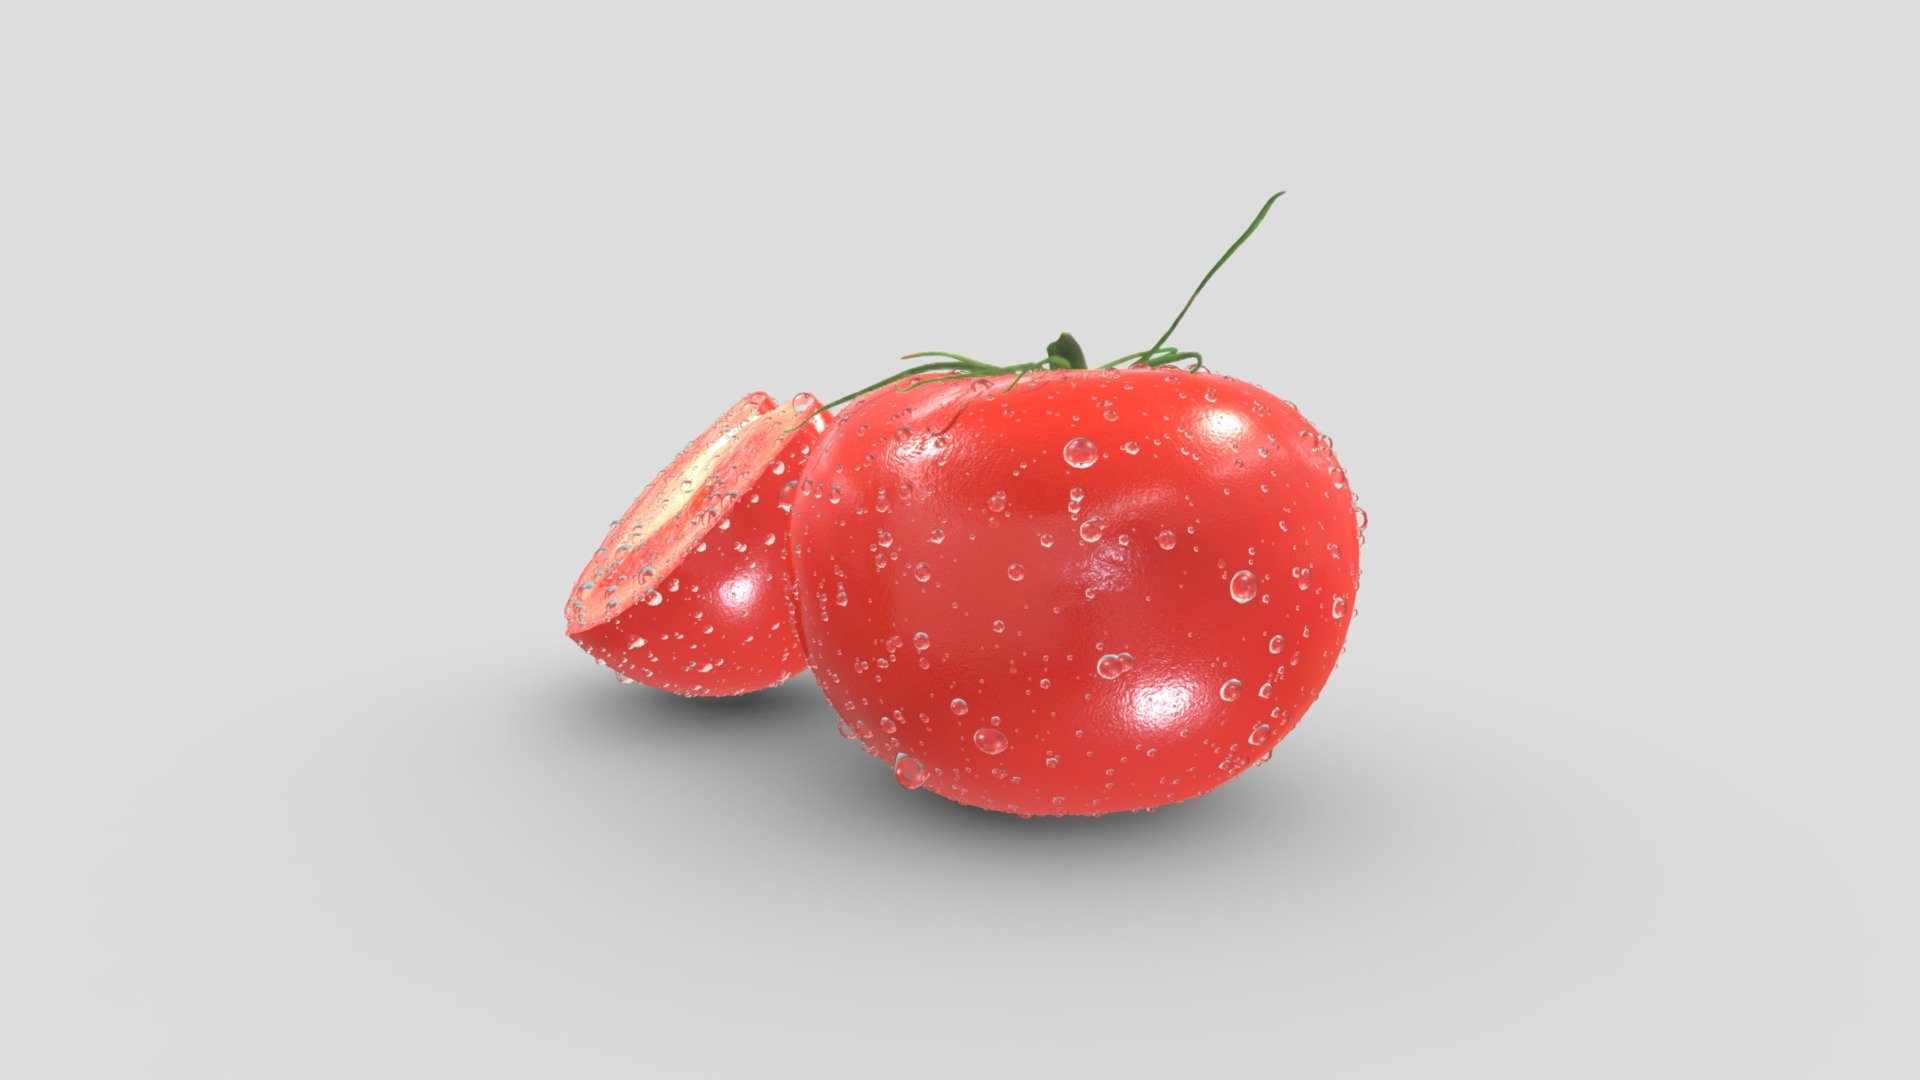 Tomato 3D Fruits And Vegetables Models